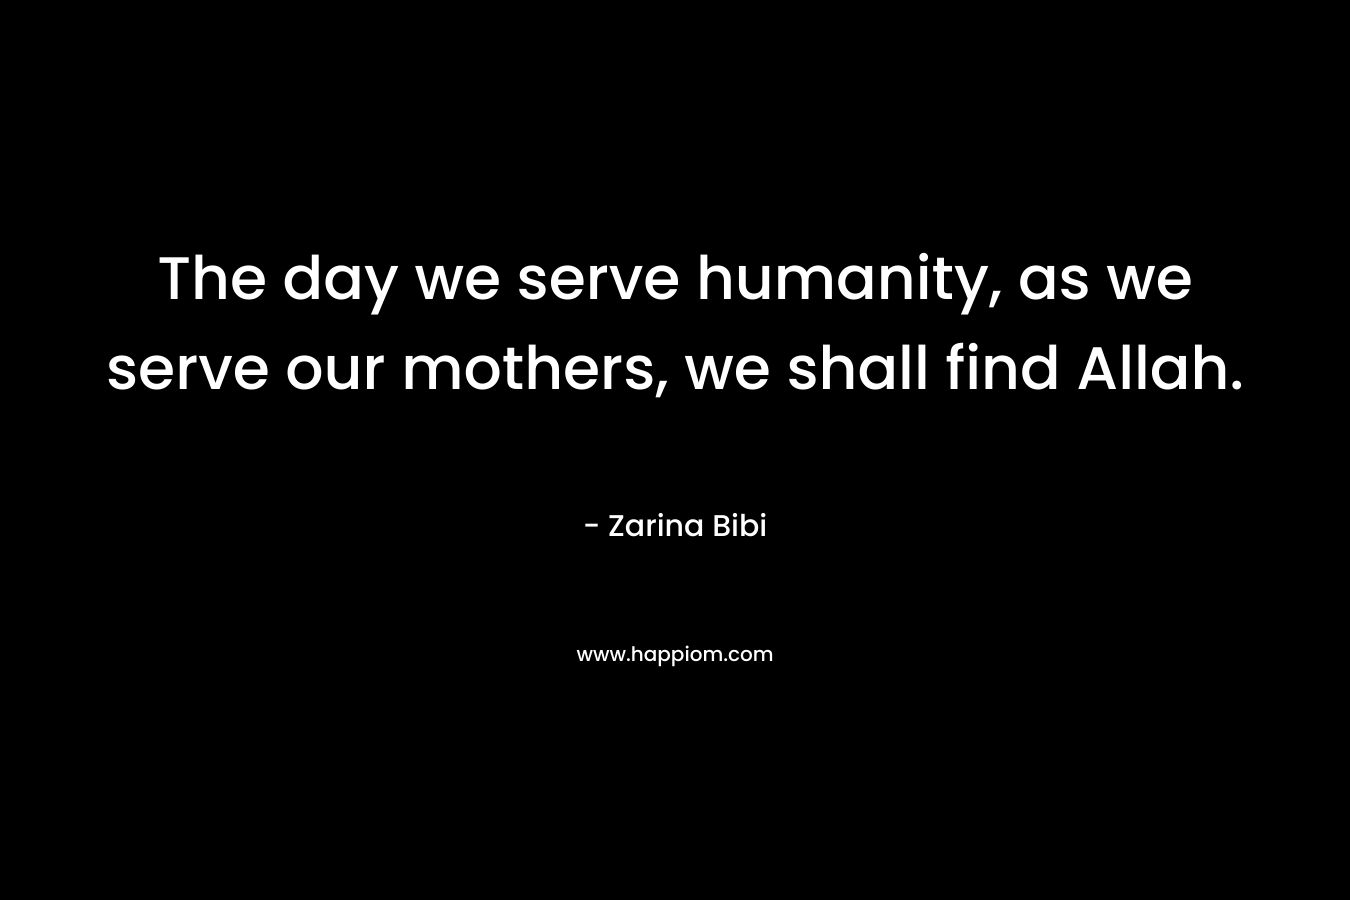 The day we serve humanity, as we serve our mothers, we shall find Allah.